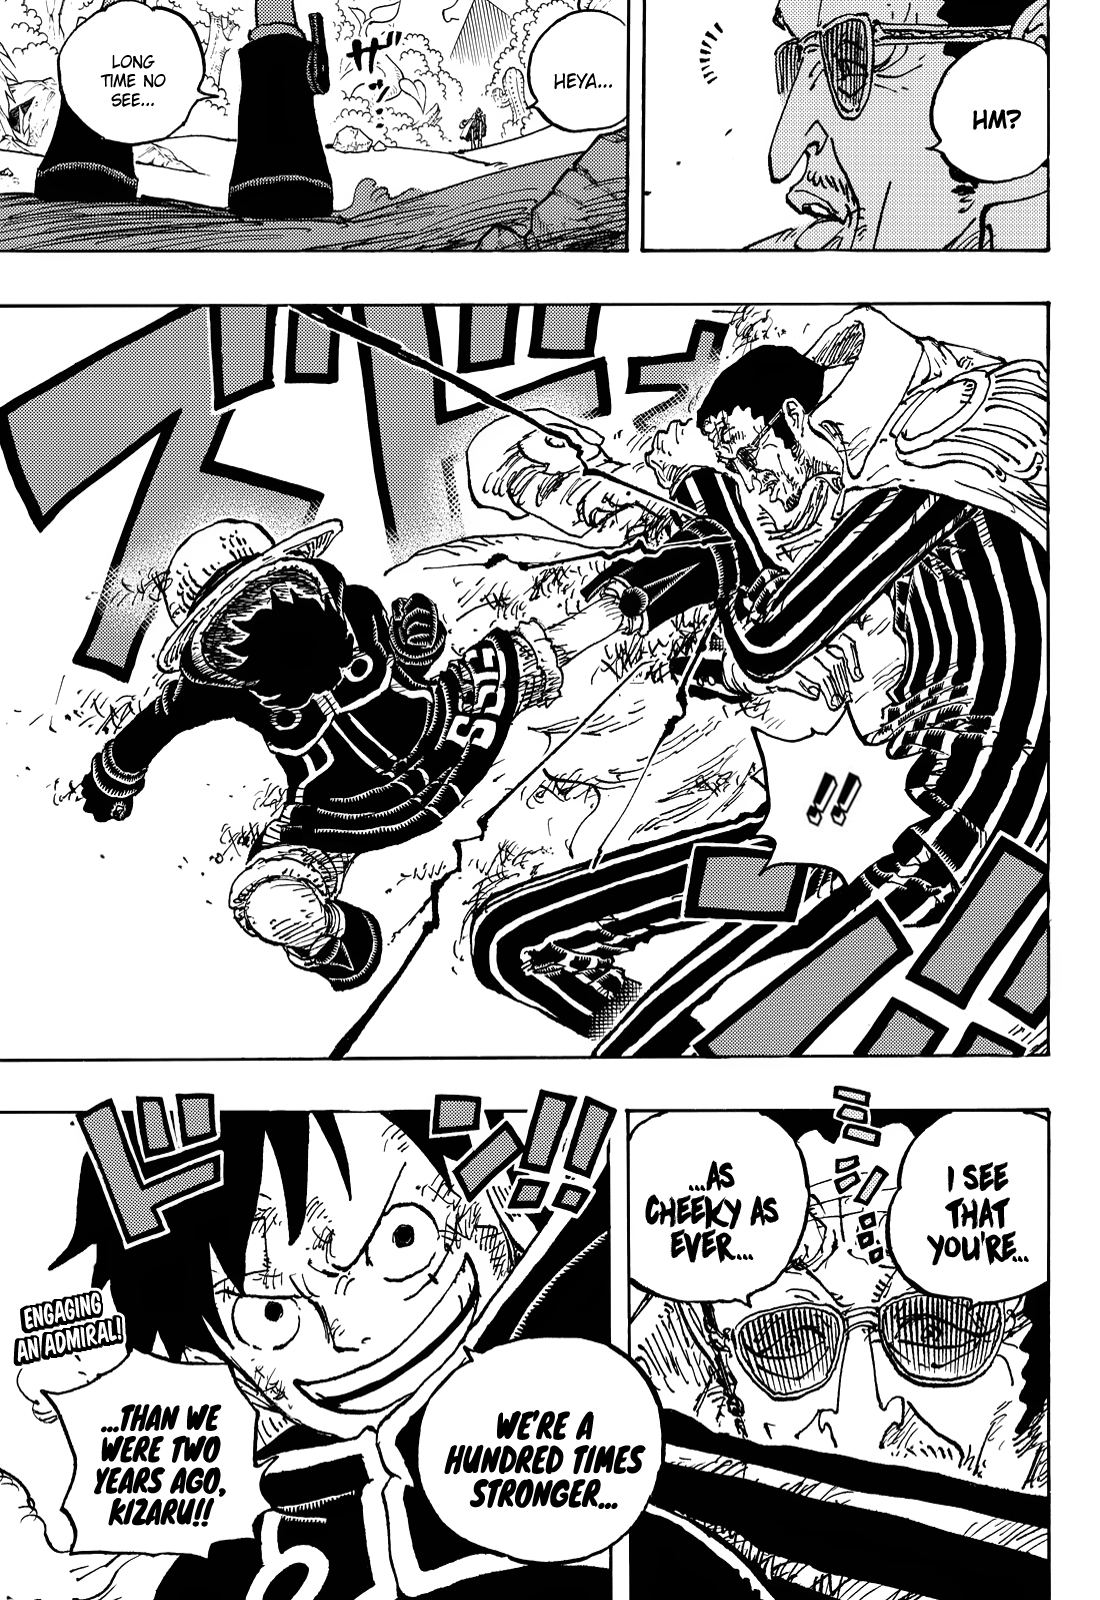 One Piece, Chapter 1091  TcbScans Org - Free Manga Online in High Quality